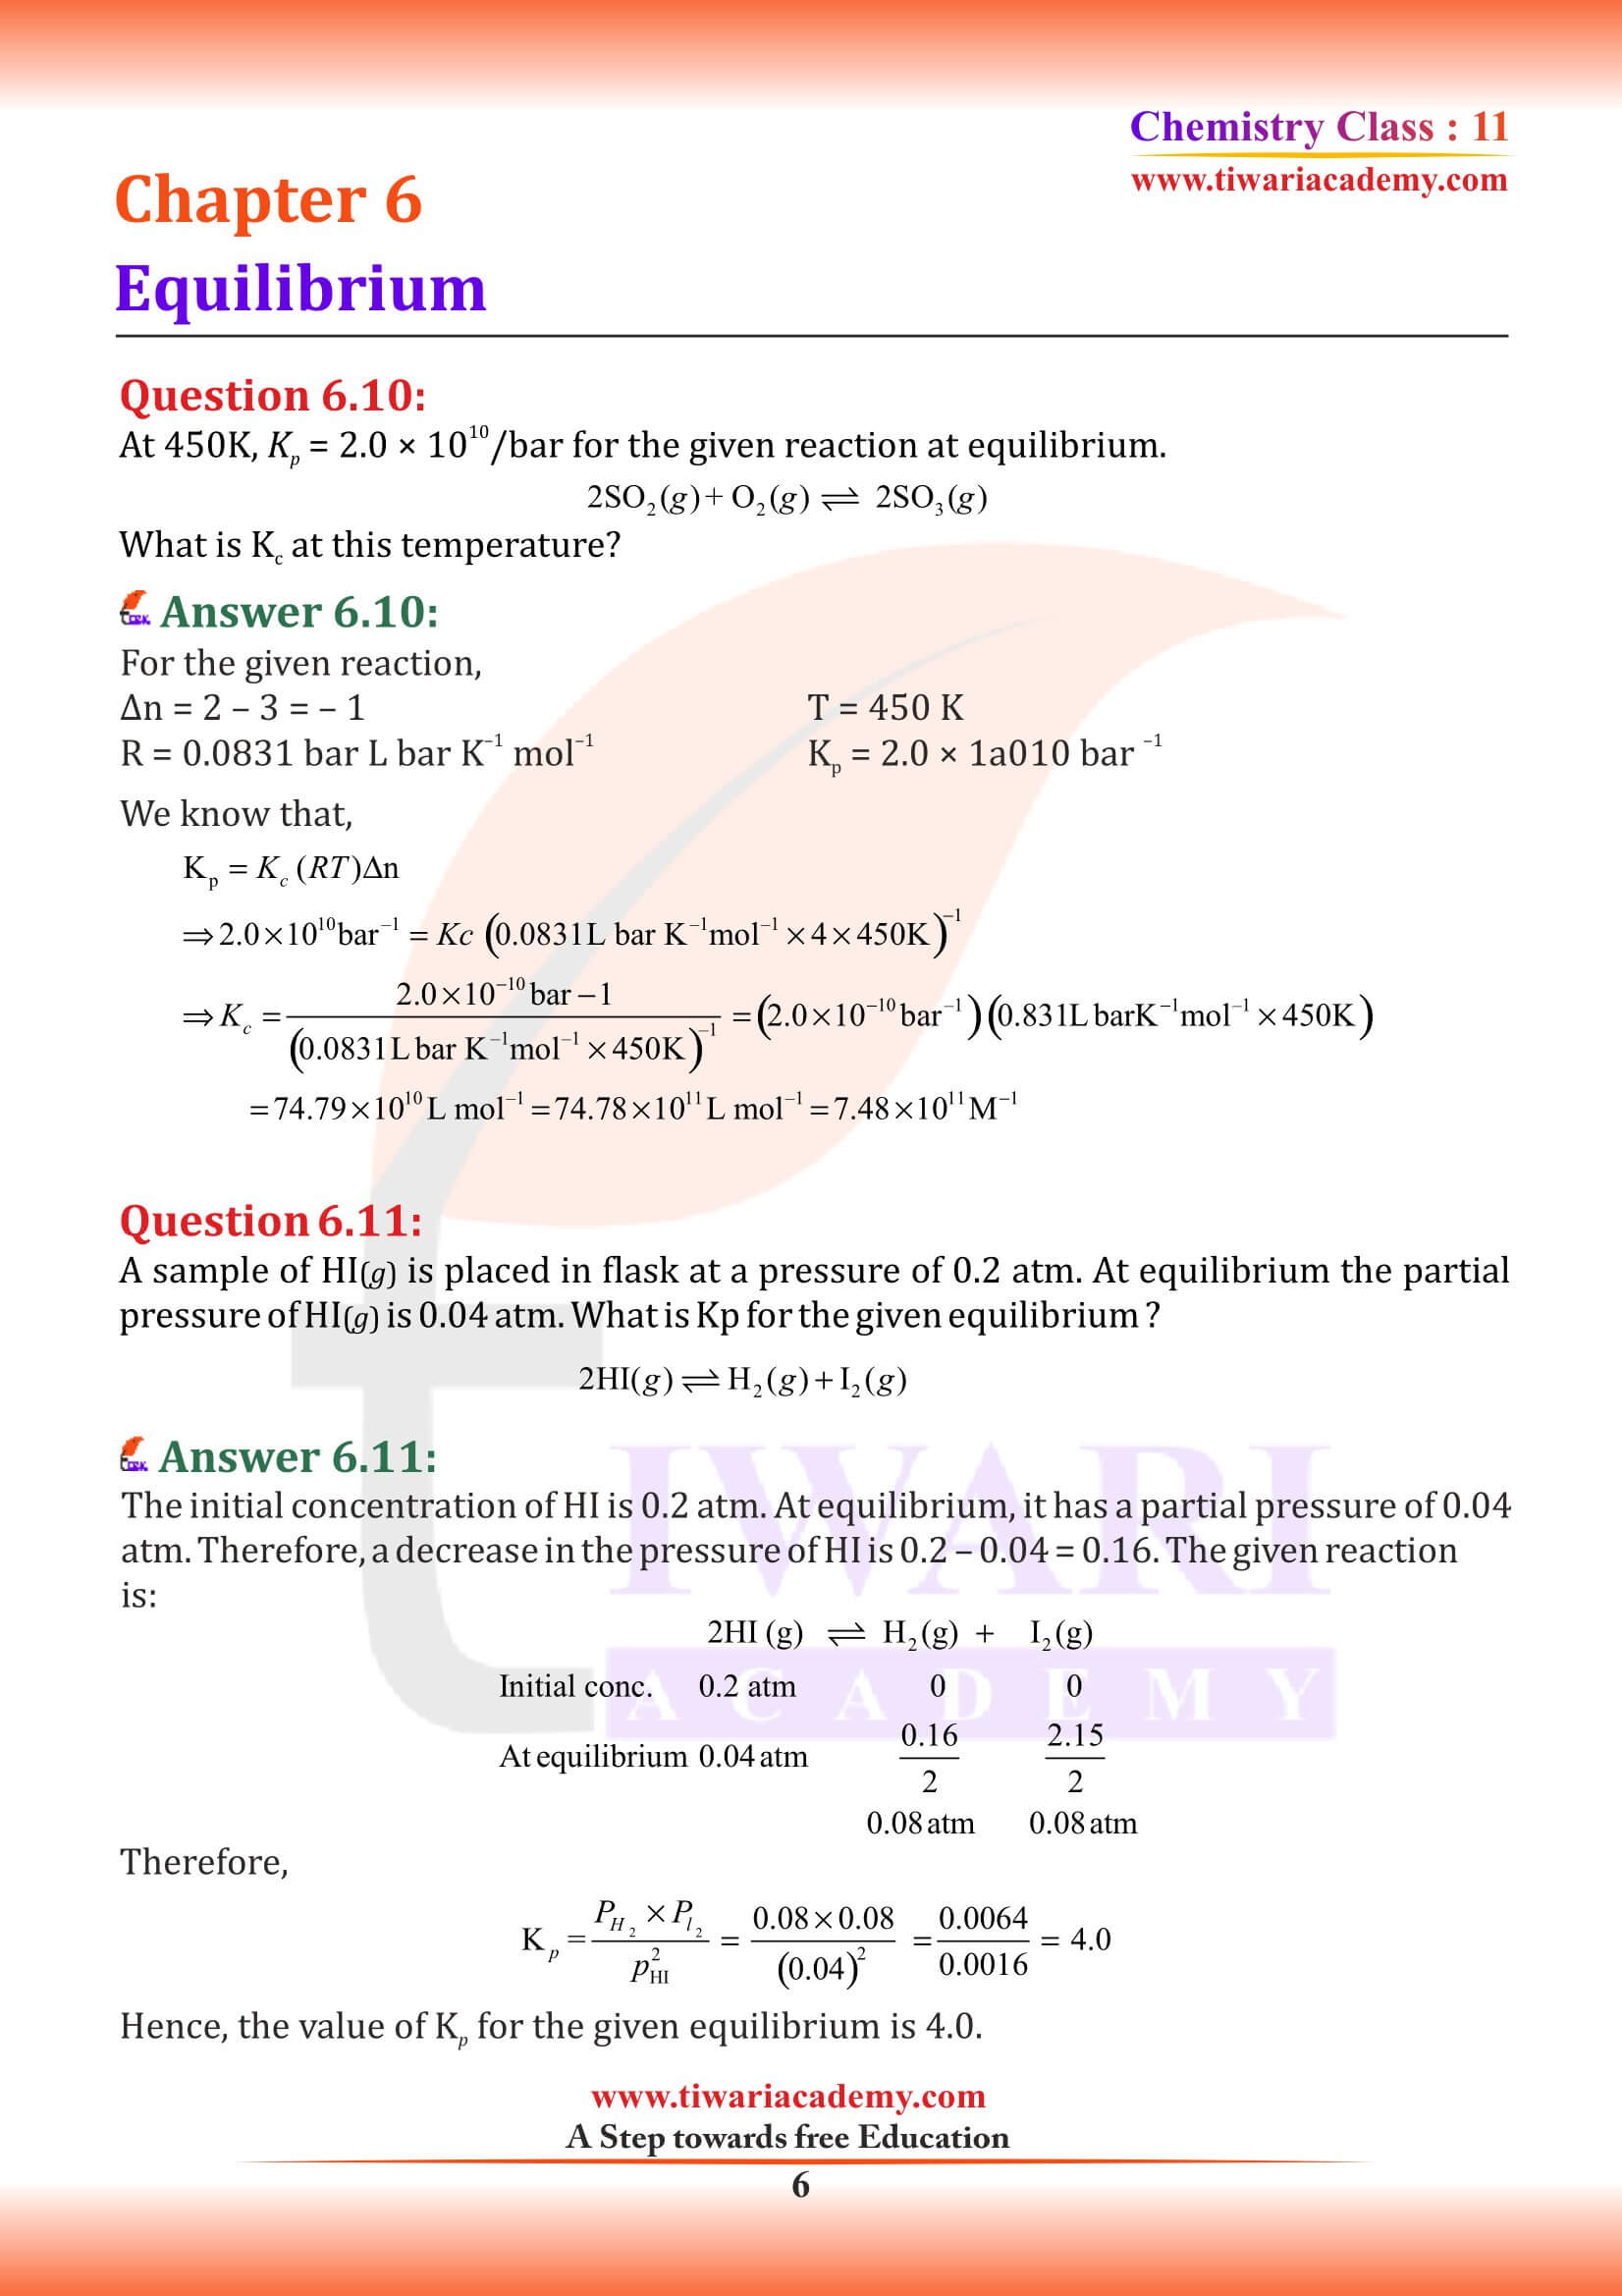 NCERT Solutions for Class 11 Chemistry Chapter 6 updated